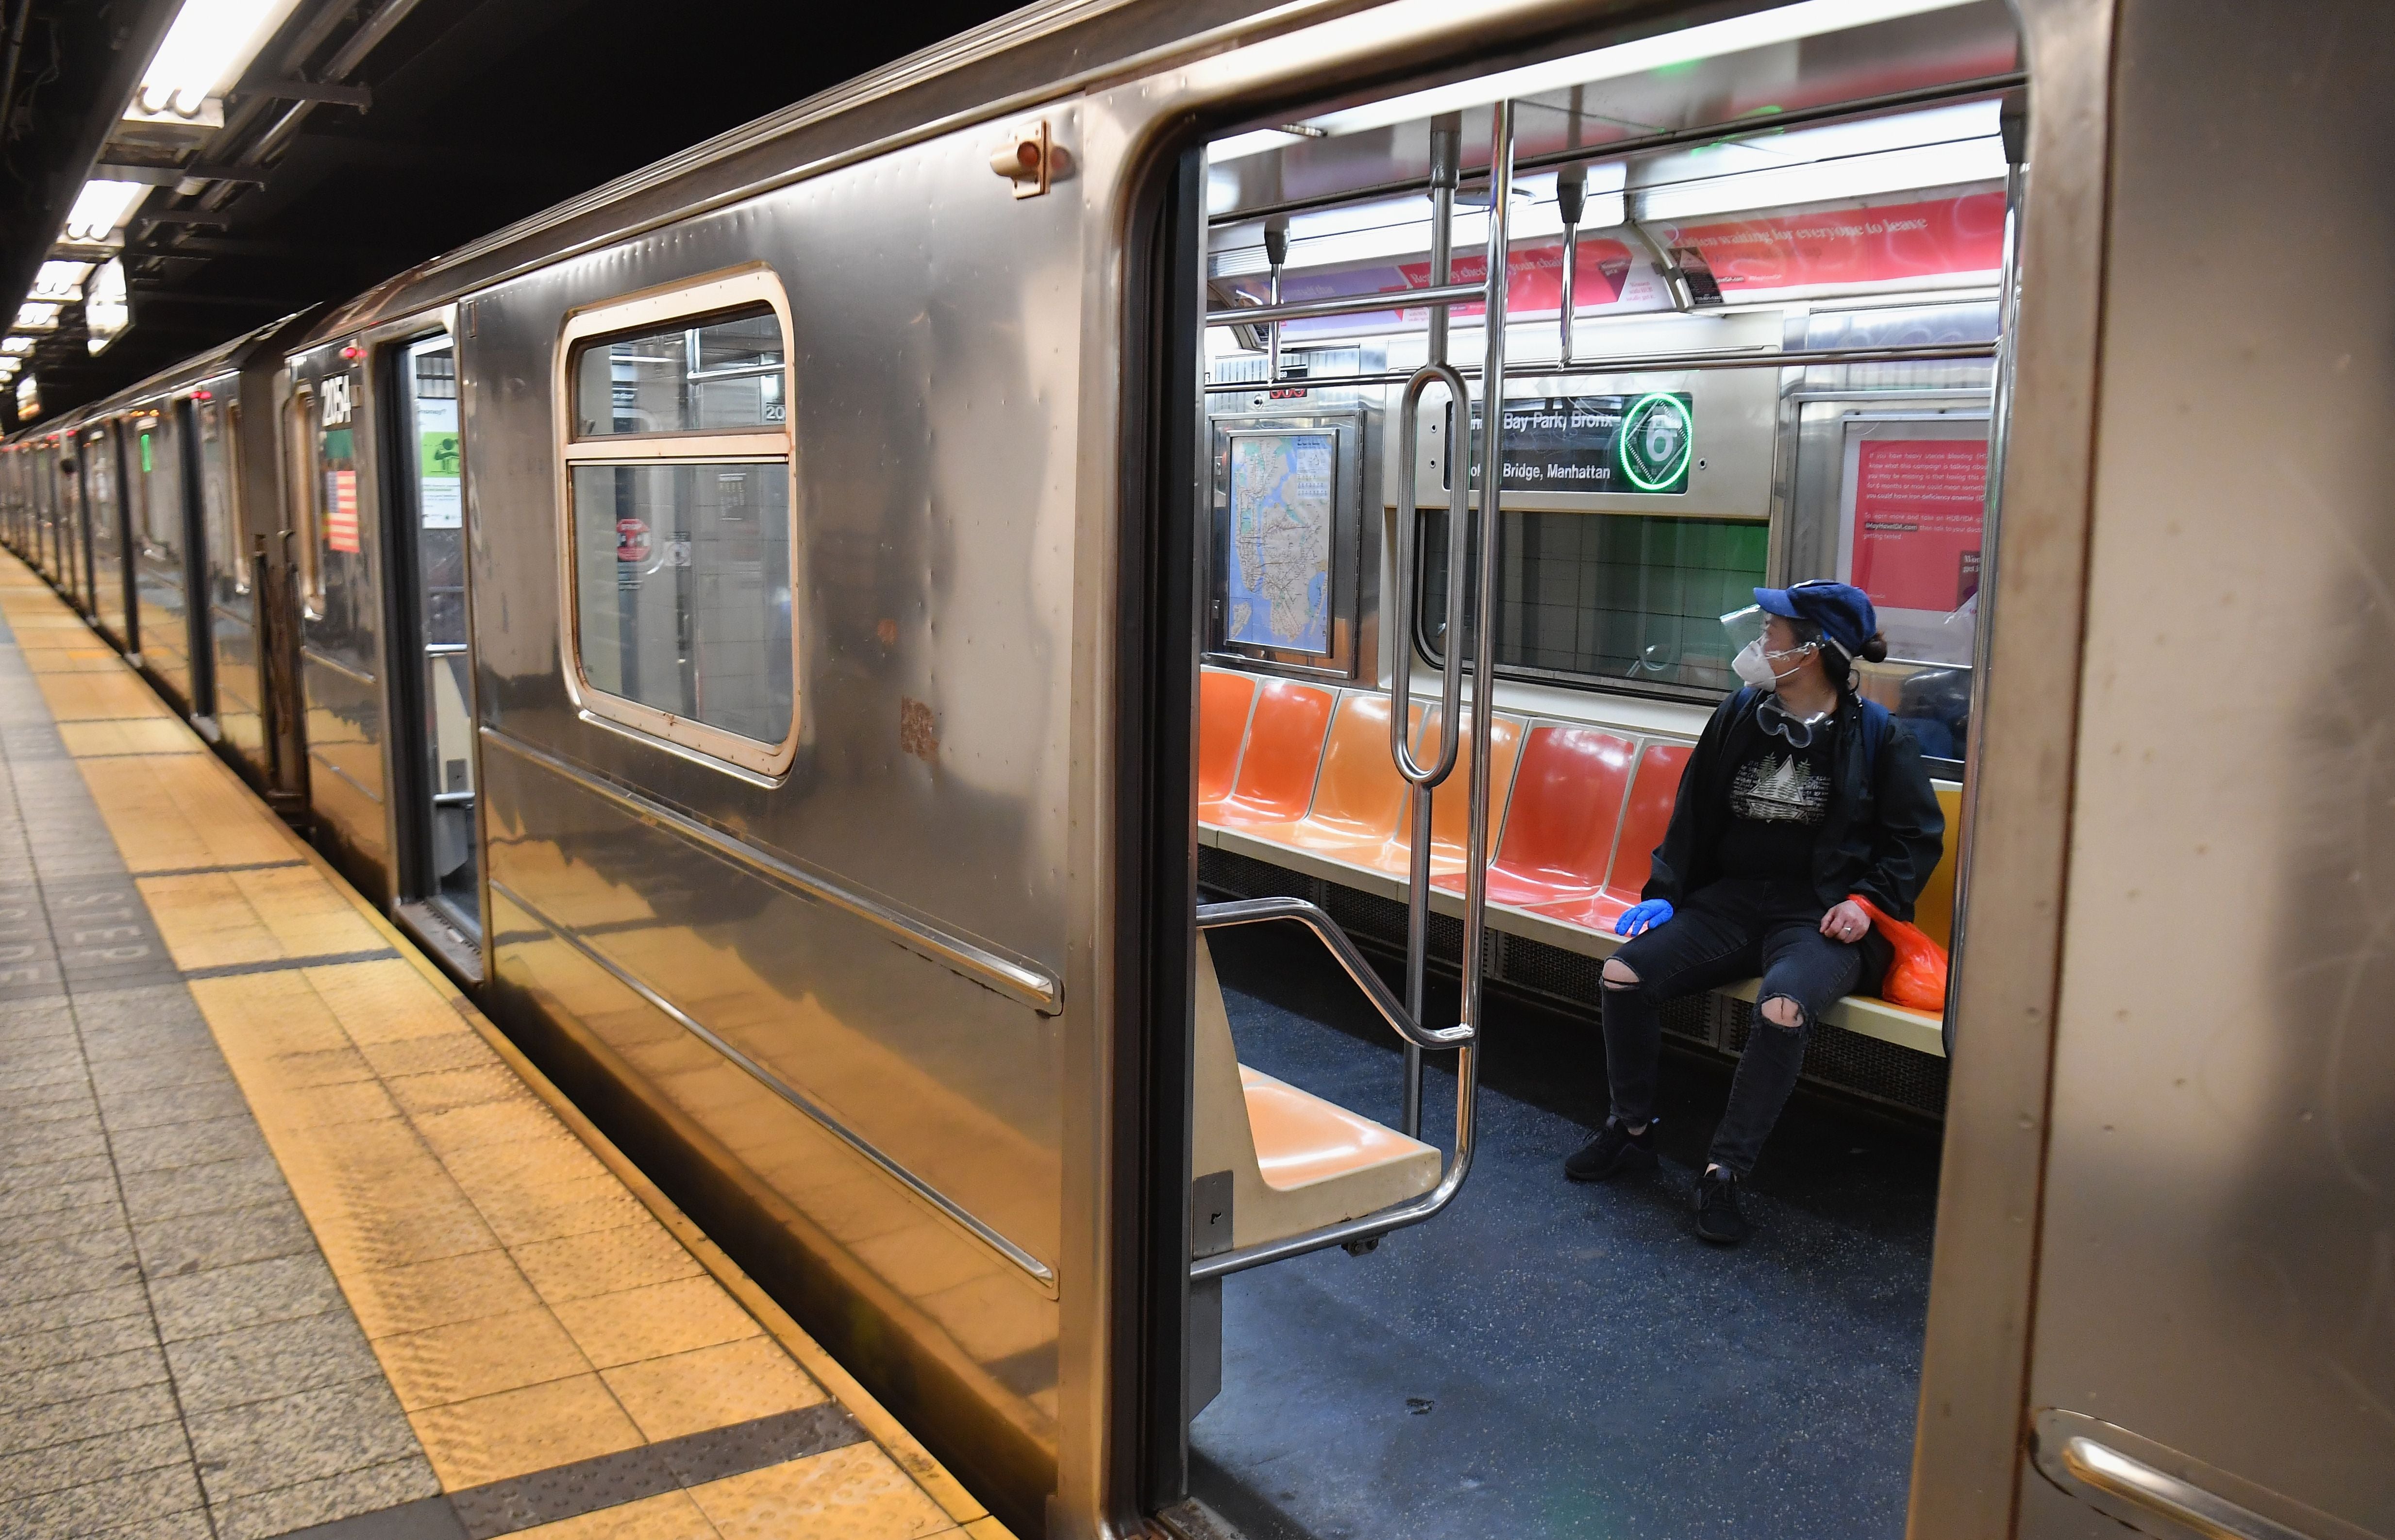 The MTA experienced a cyber attack in April